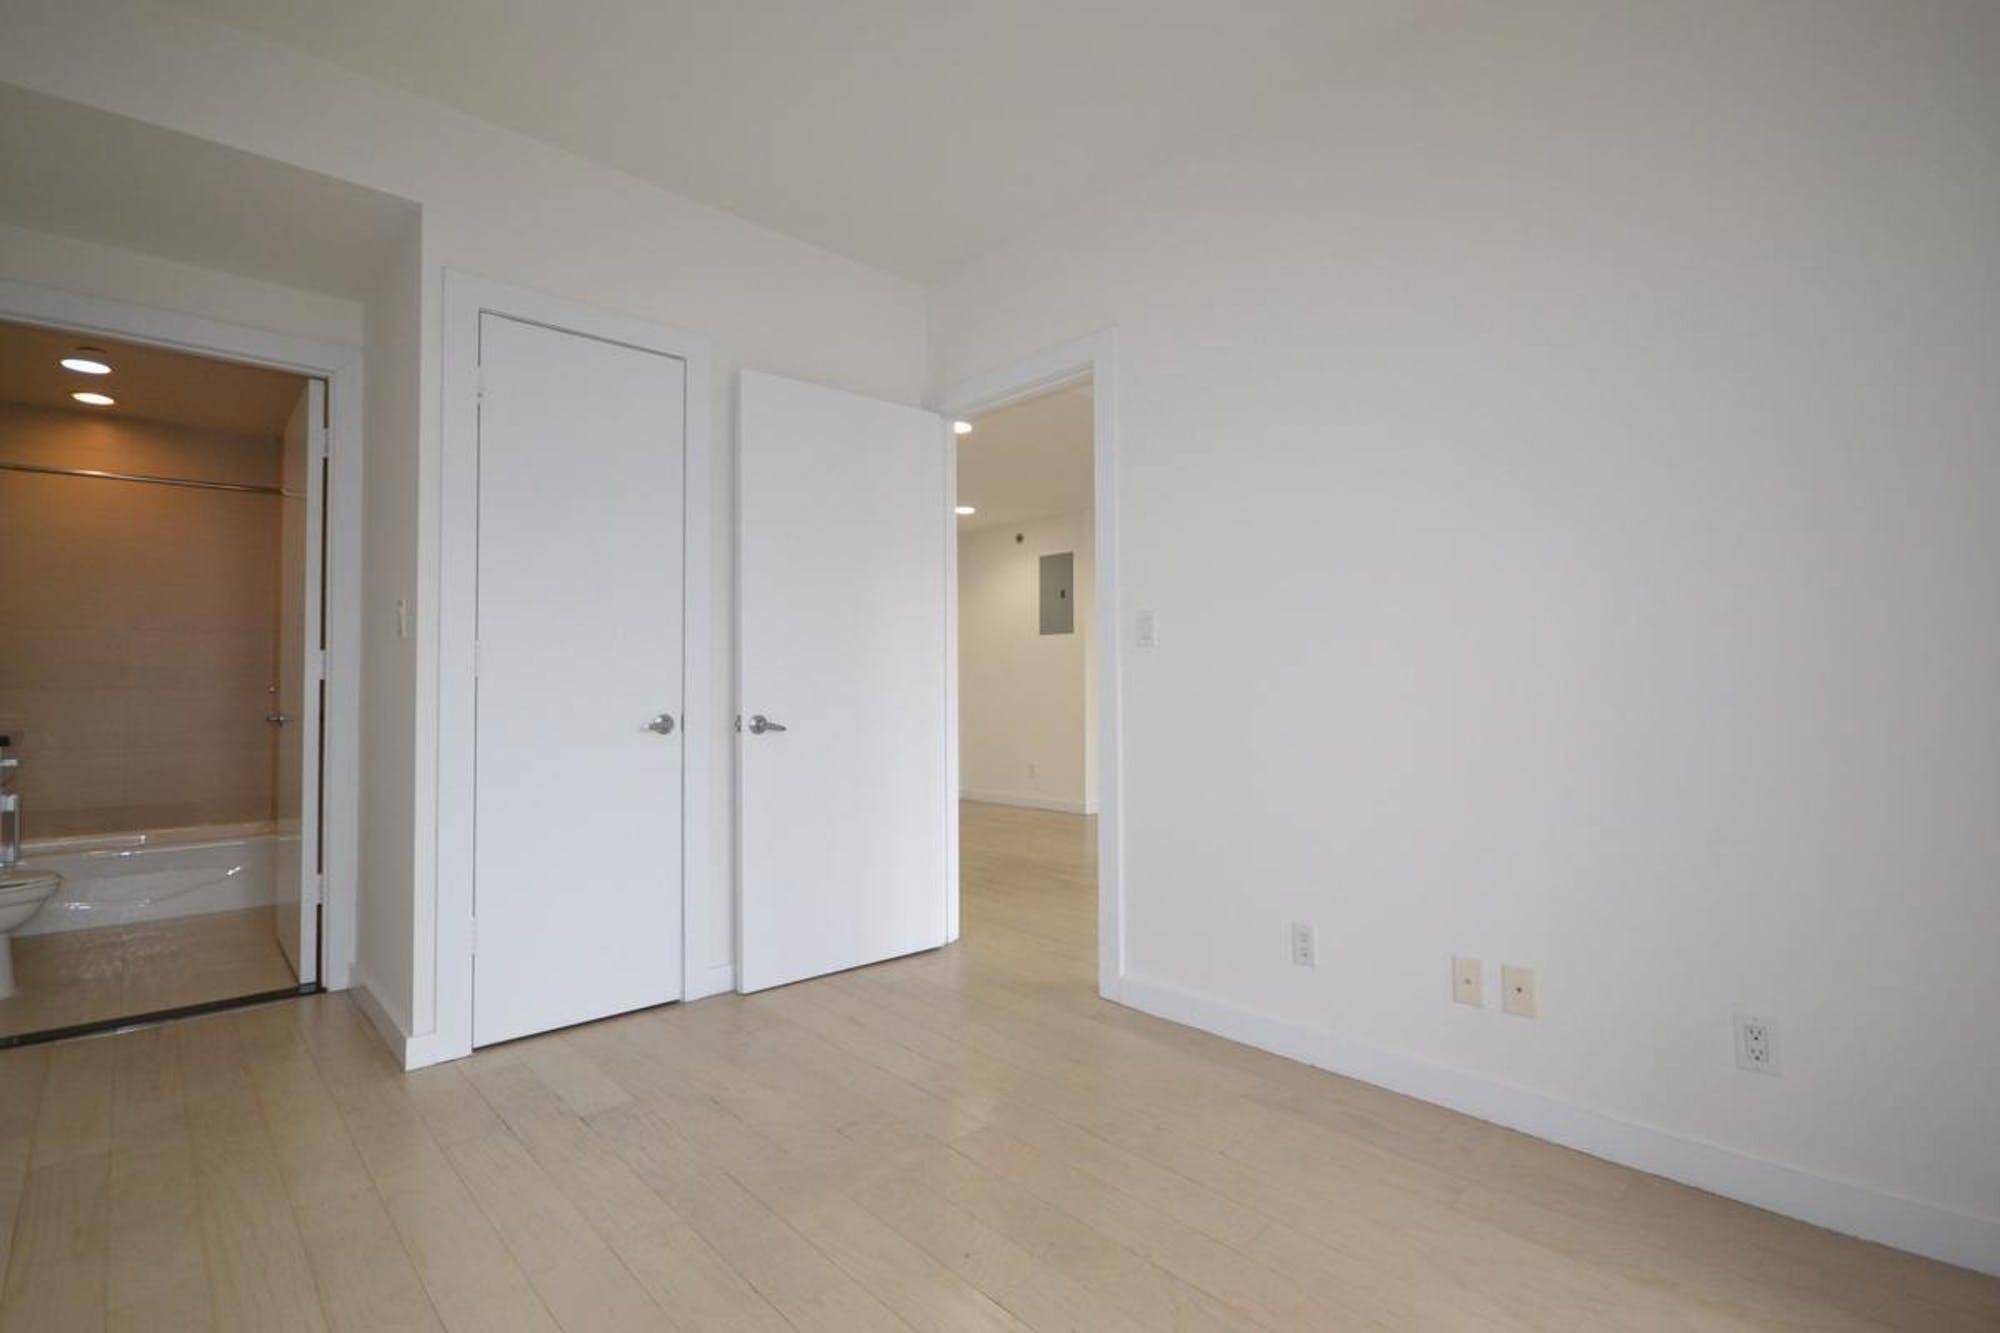 PRICE IMPROVEMENT NO FEE and 1 Month FREE Shown By Appointment Incredible opportunity to rent a 2 bedroom apartment with 2 full bathrooms and balcony.